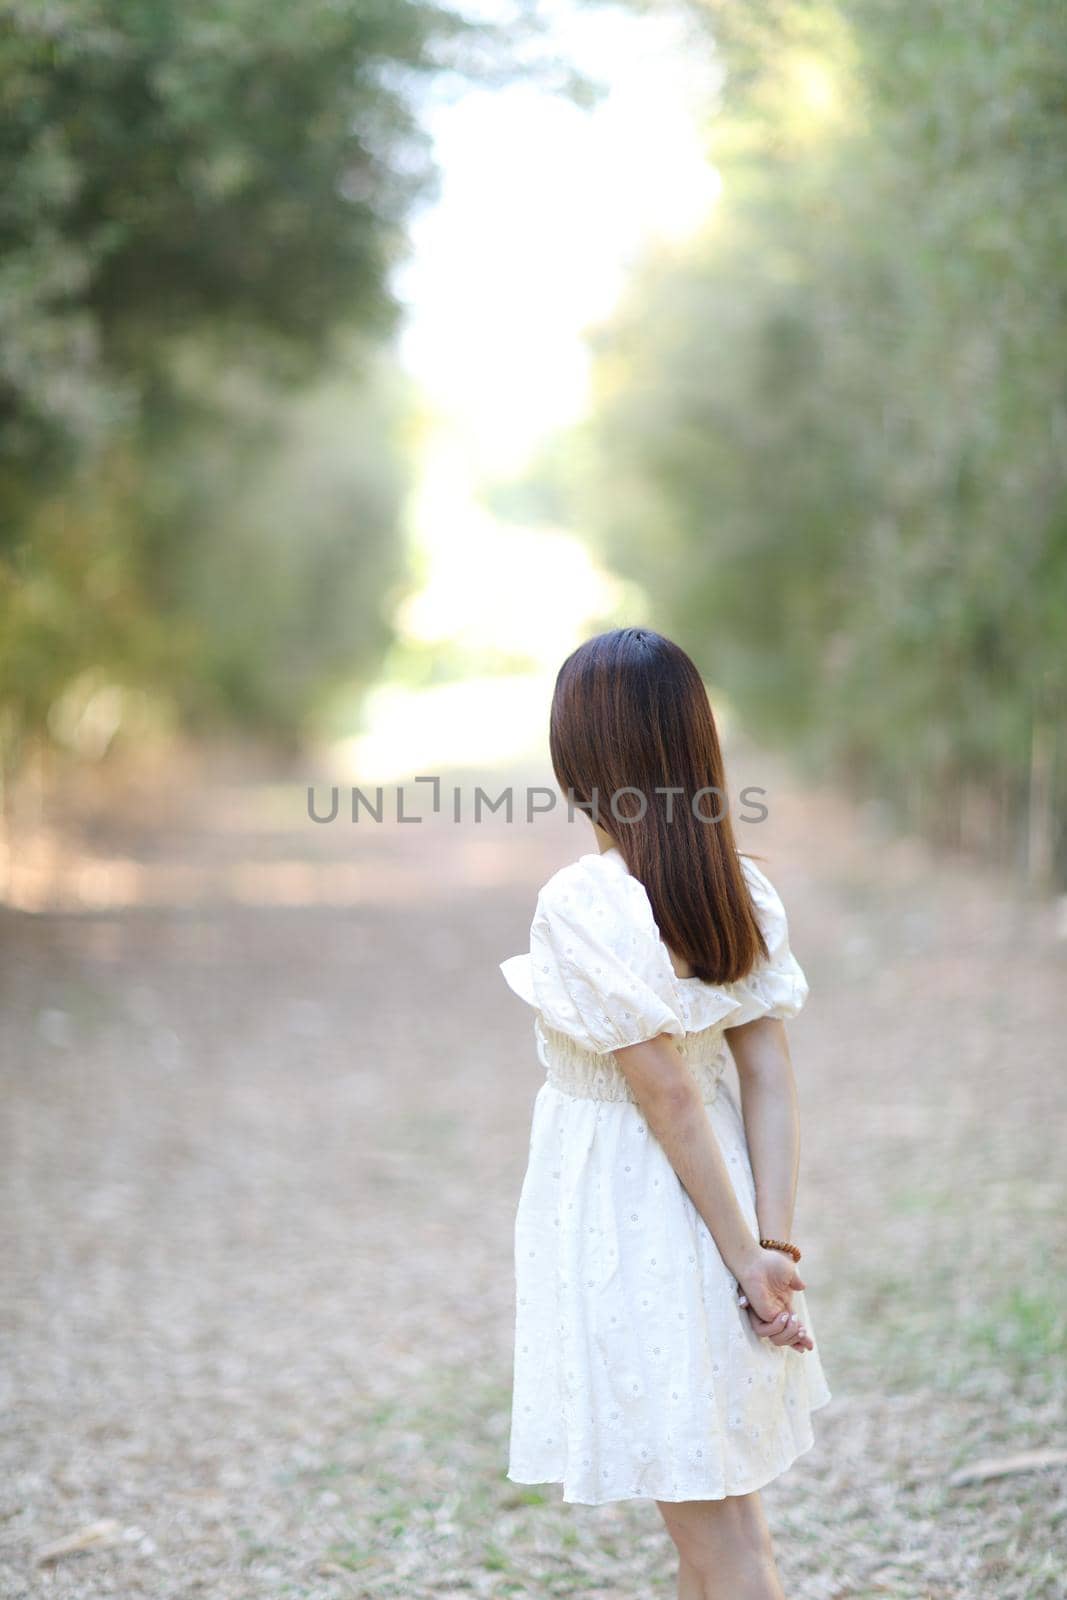 Beautiful young woman with white dress on bamboo forest background